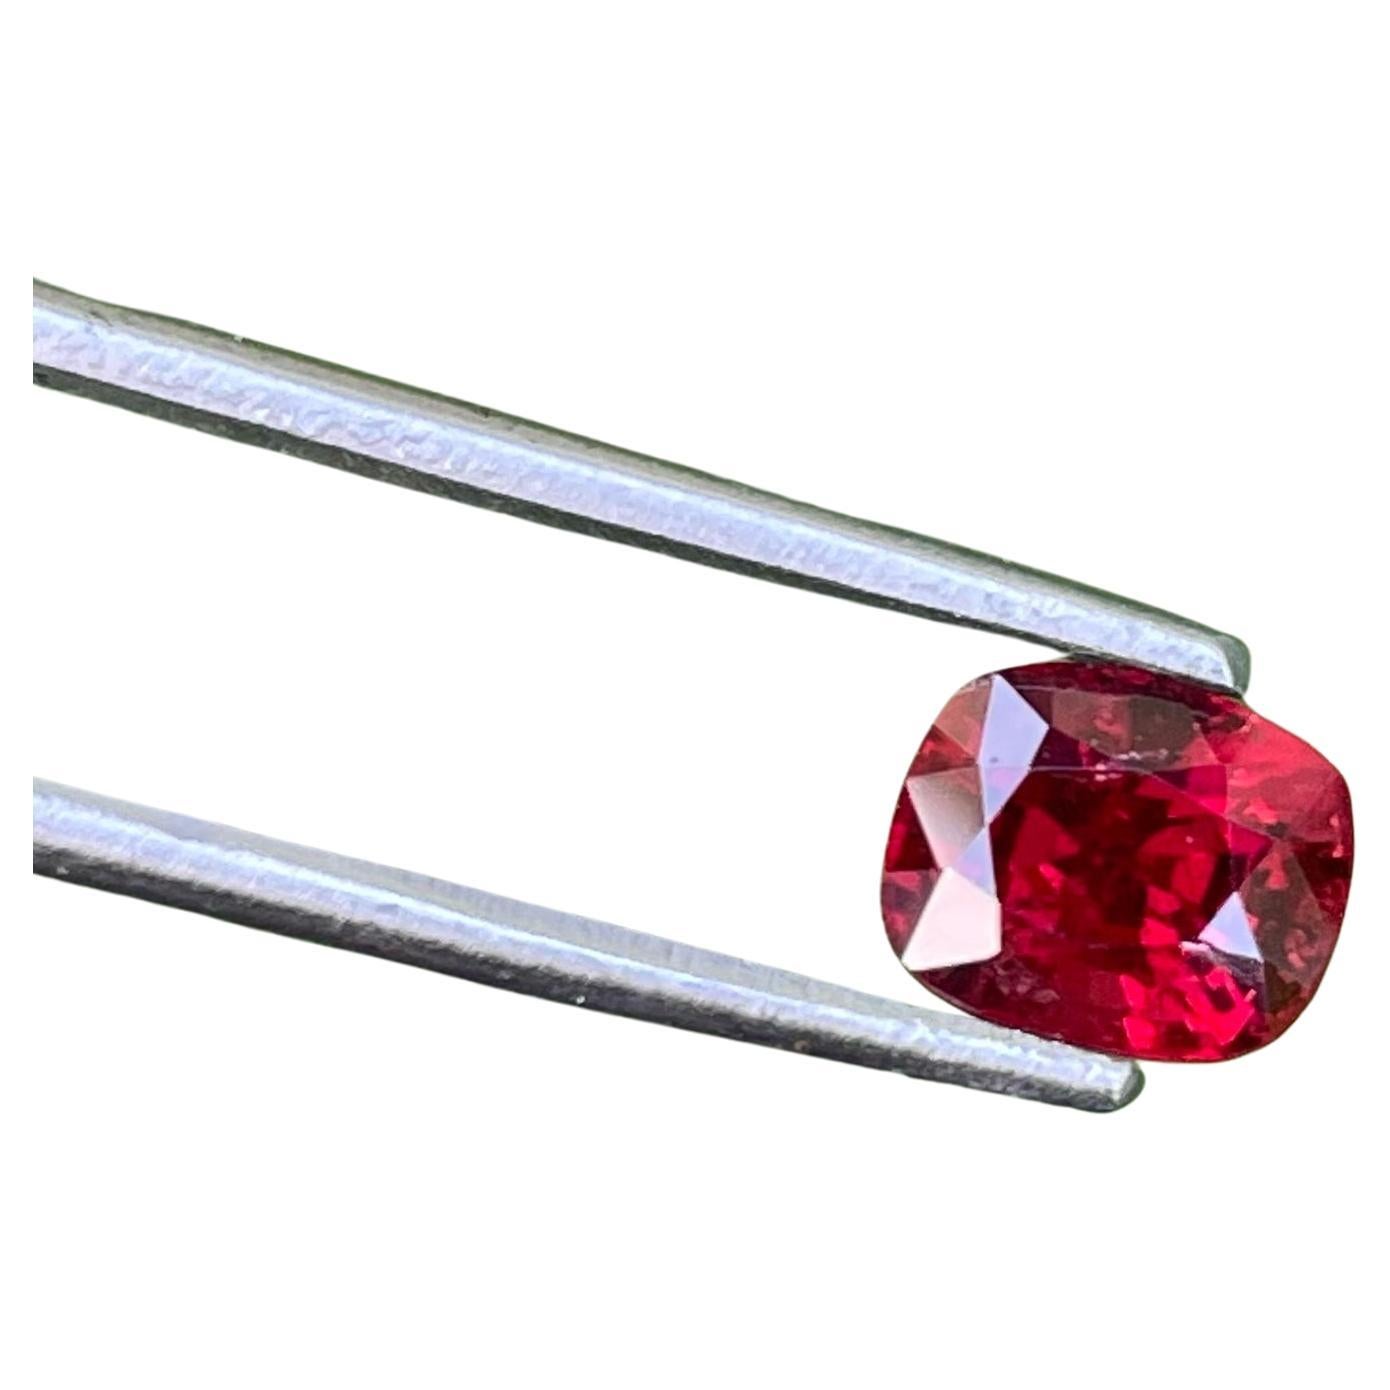 Shiny Red Spinel Stone 1.17 Carats For Sale